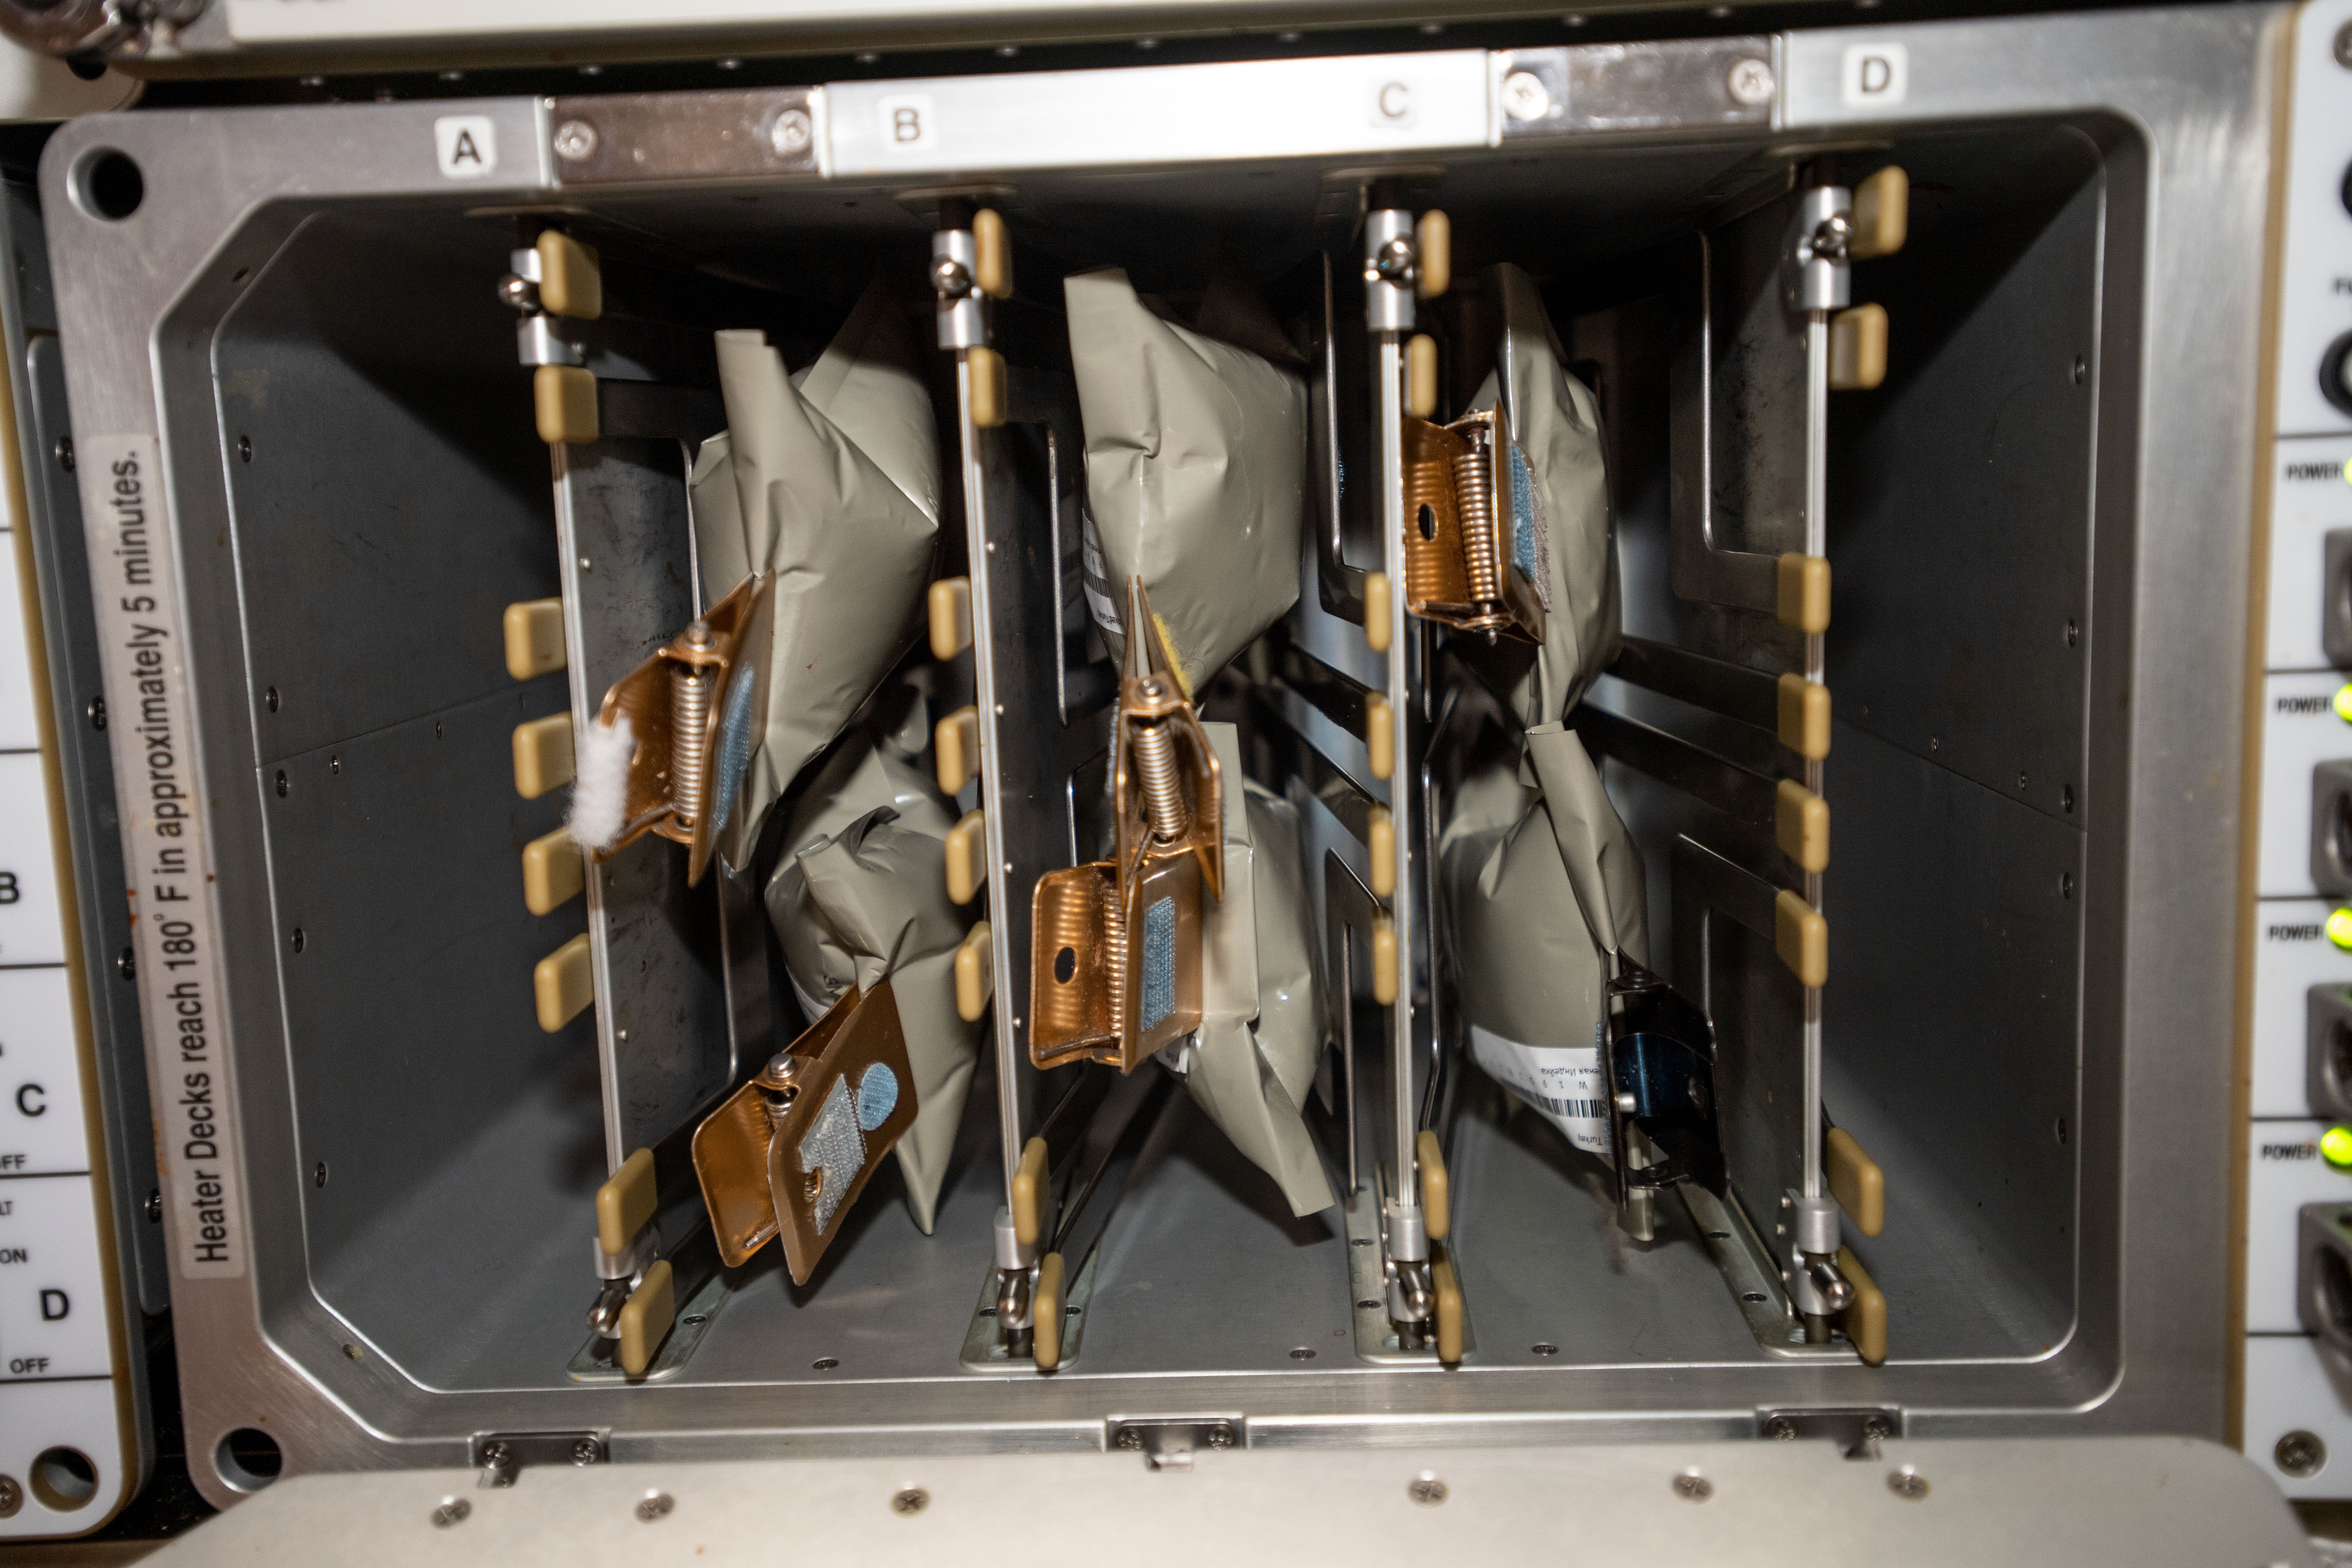 Image of turkey packages in the Galley Food Warmer